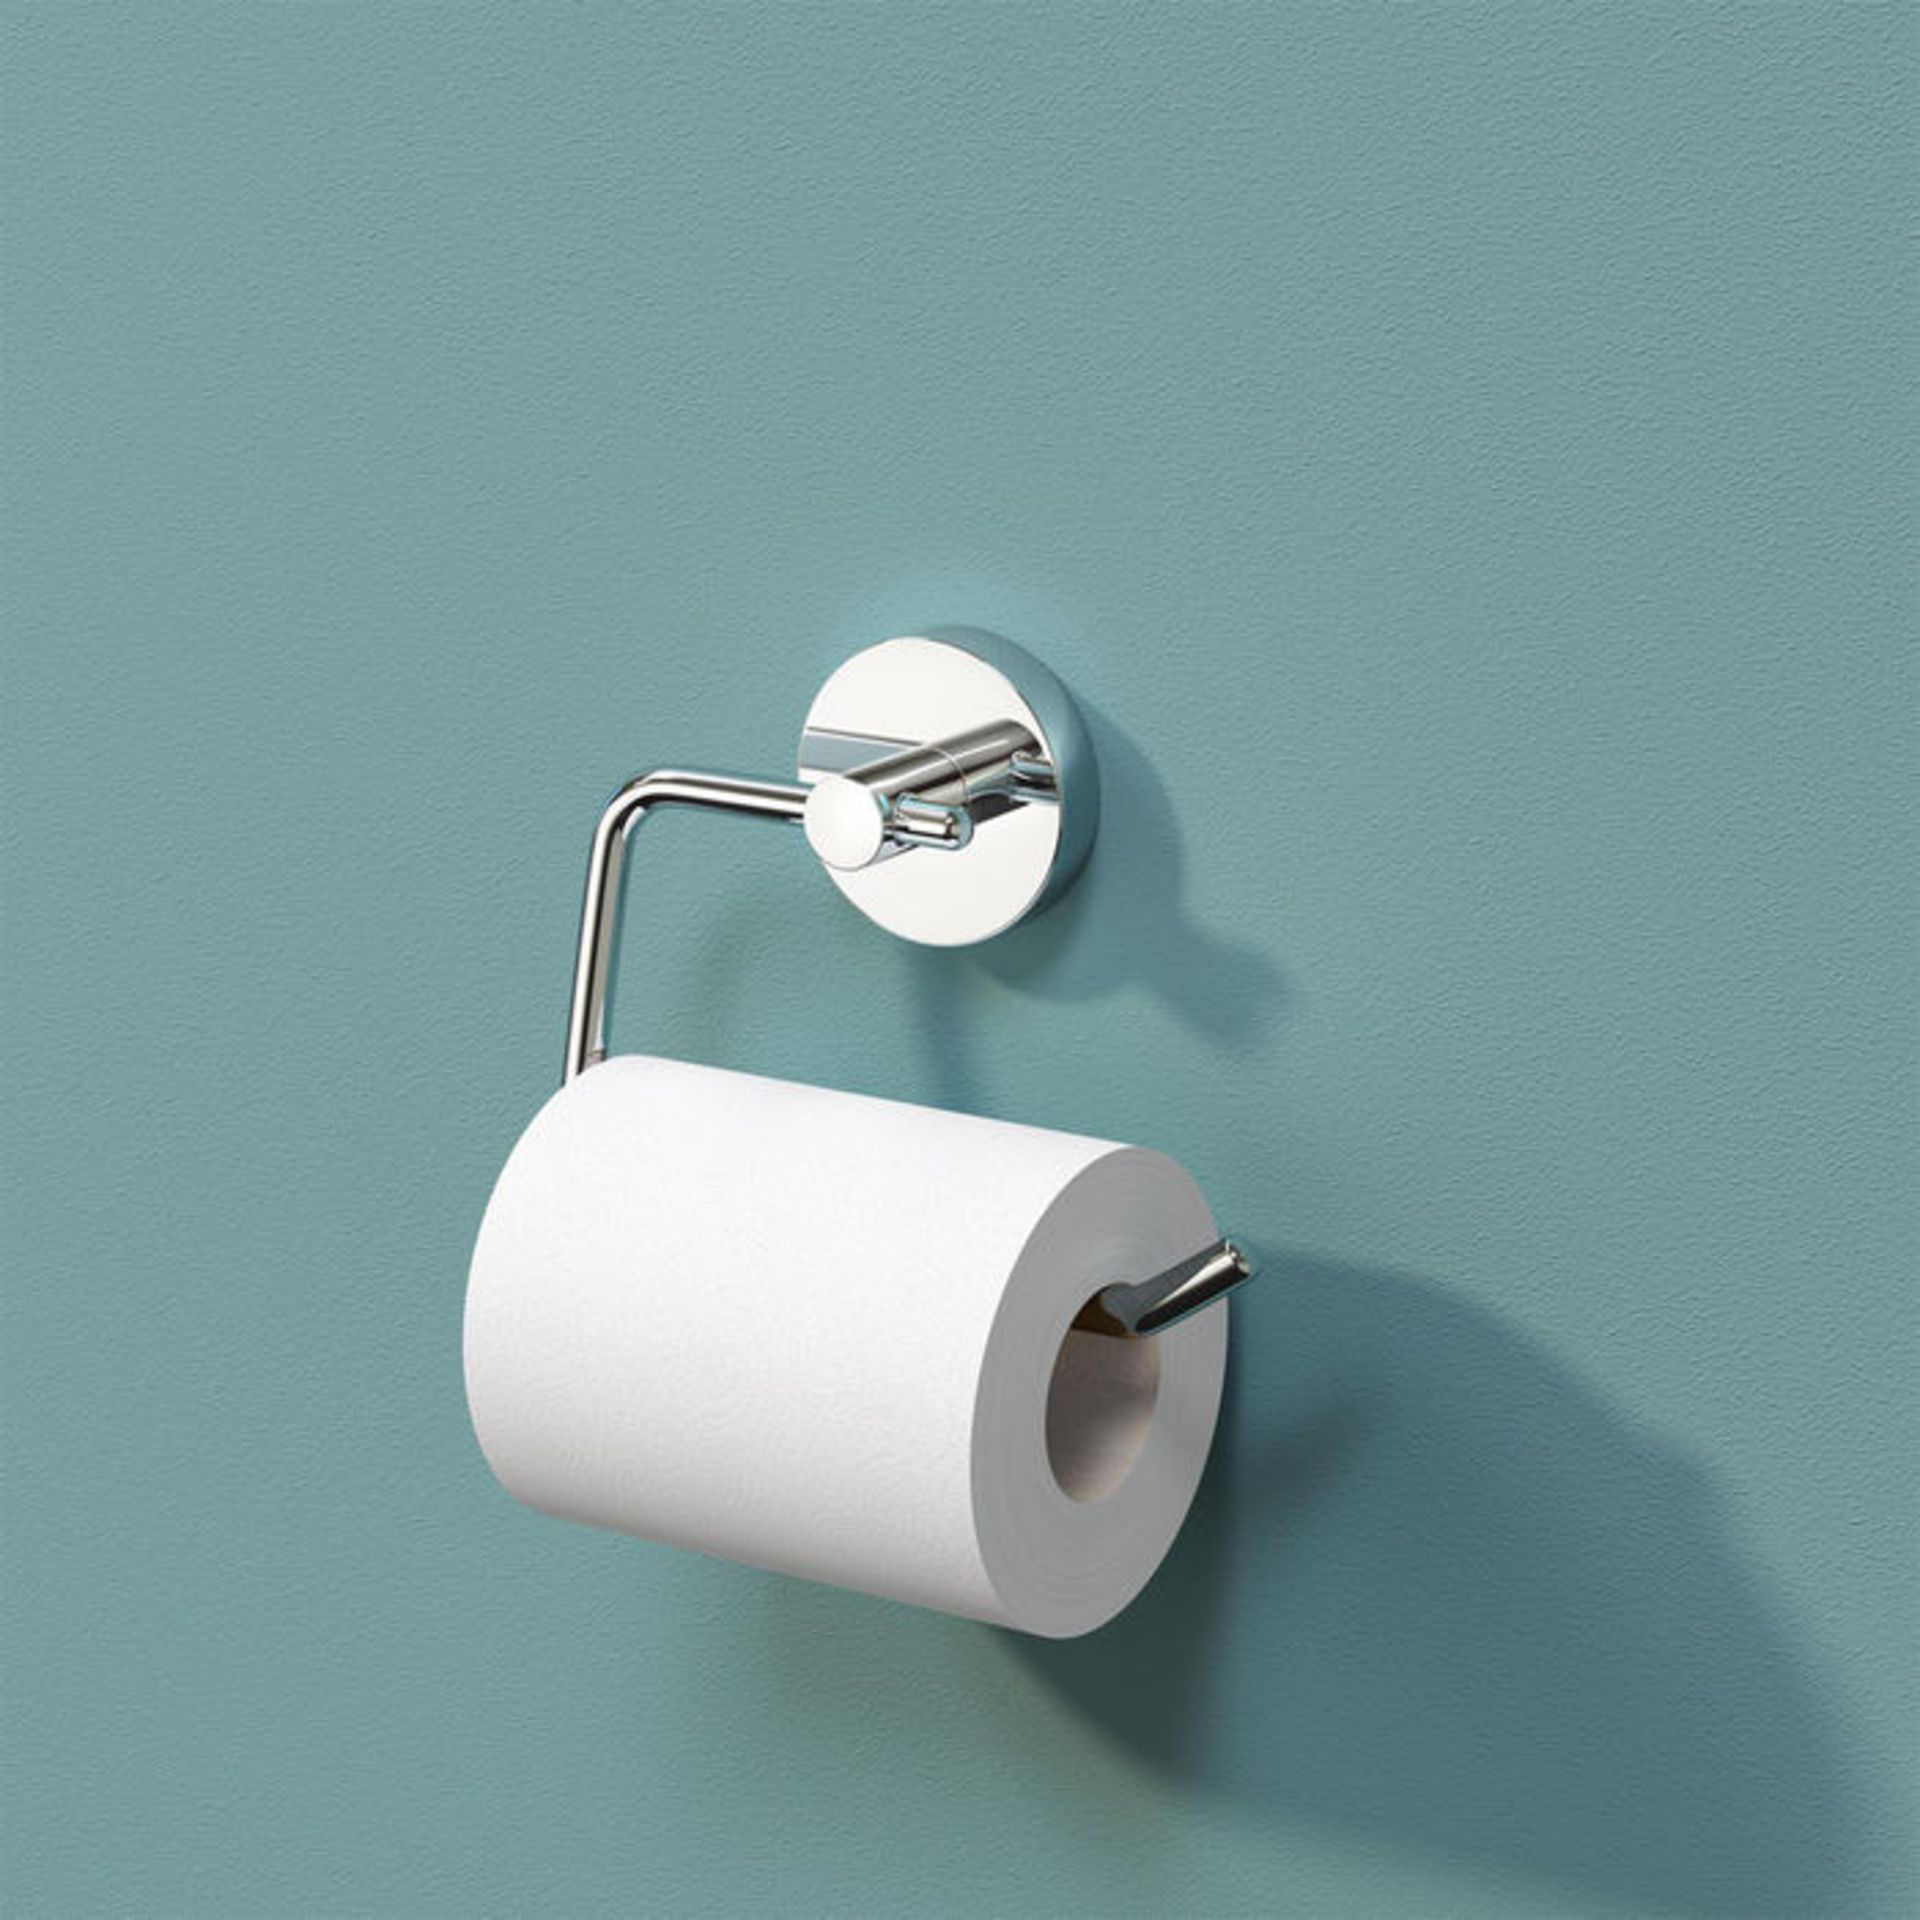 (CP98) Finsbury Toilet Roll Holder. Completes your bathroom with a little extra style Made with high